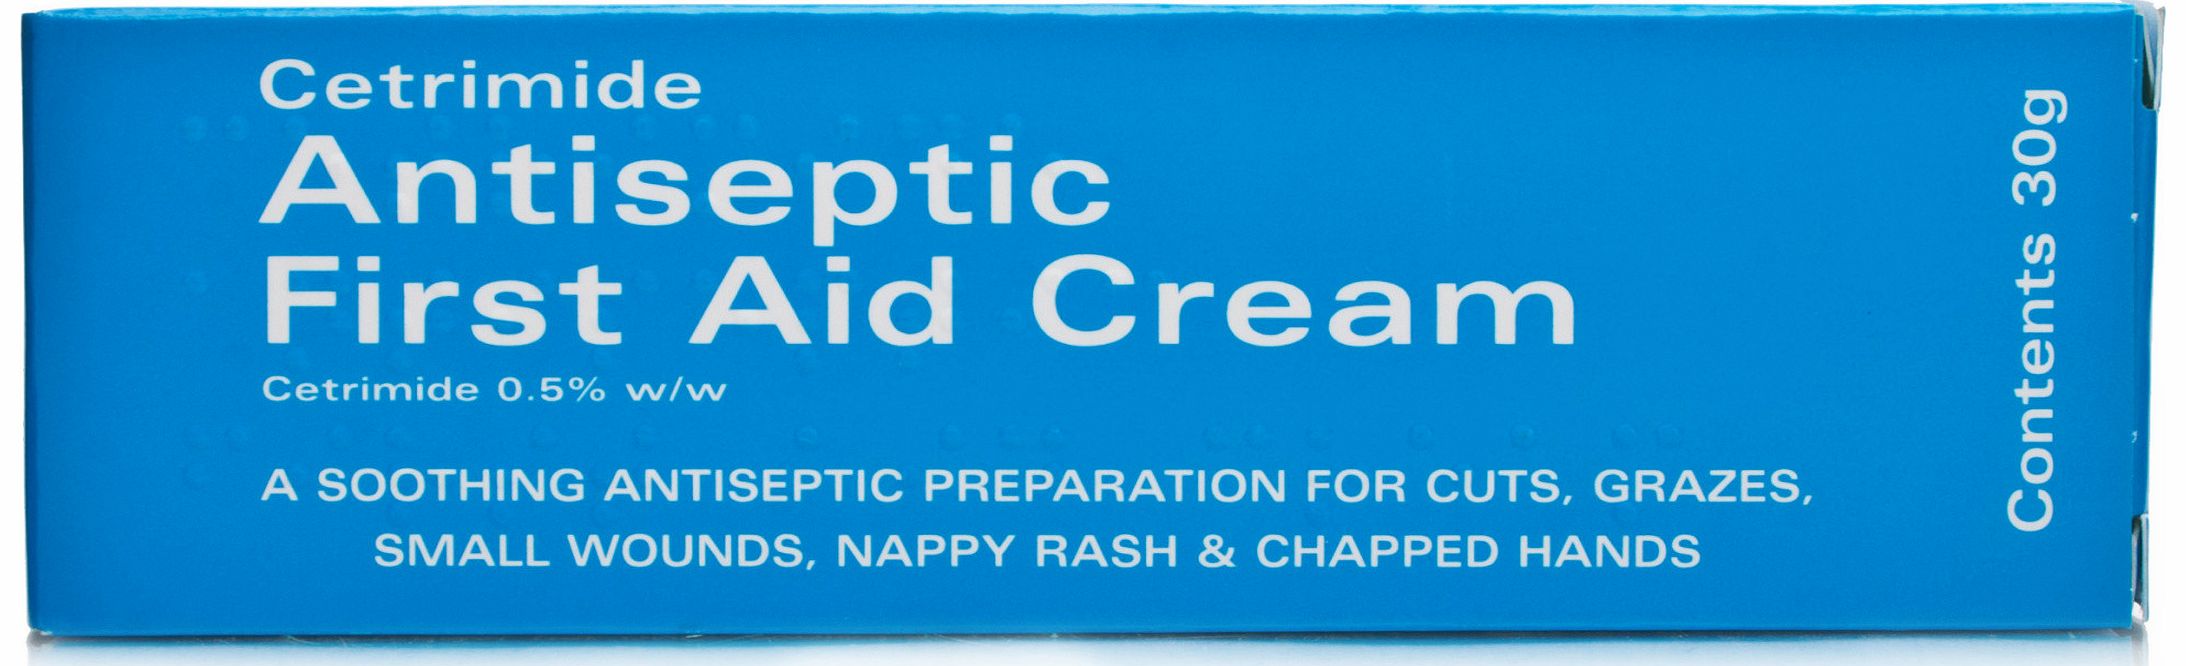 Cetramide Antiseptic First Aid Cream 30g is formulated to provide your minor wounds with fast-acting and effective treatment and relief. This soothing antiseptic cream works to lessen the pain caused by your injury and is suitable for cuts, burns and